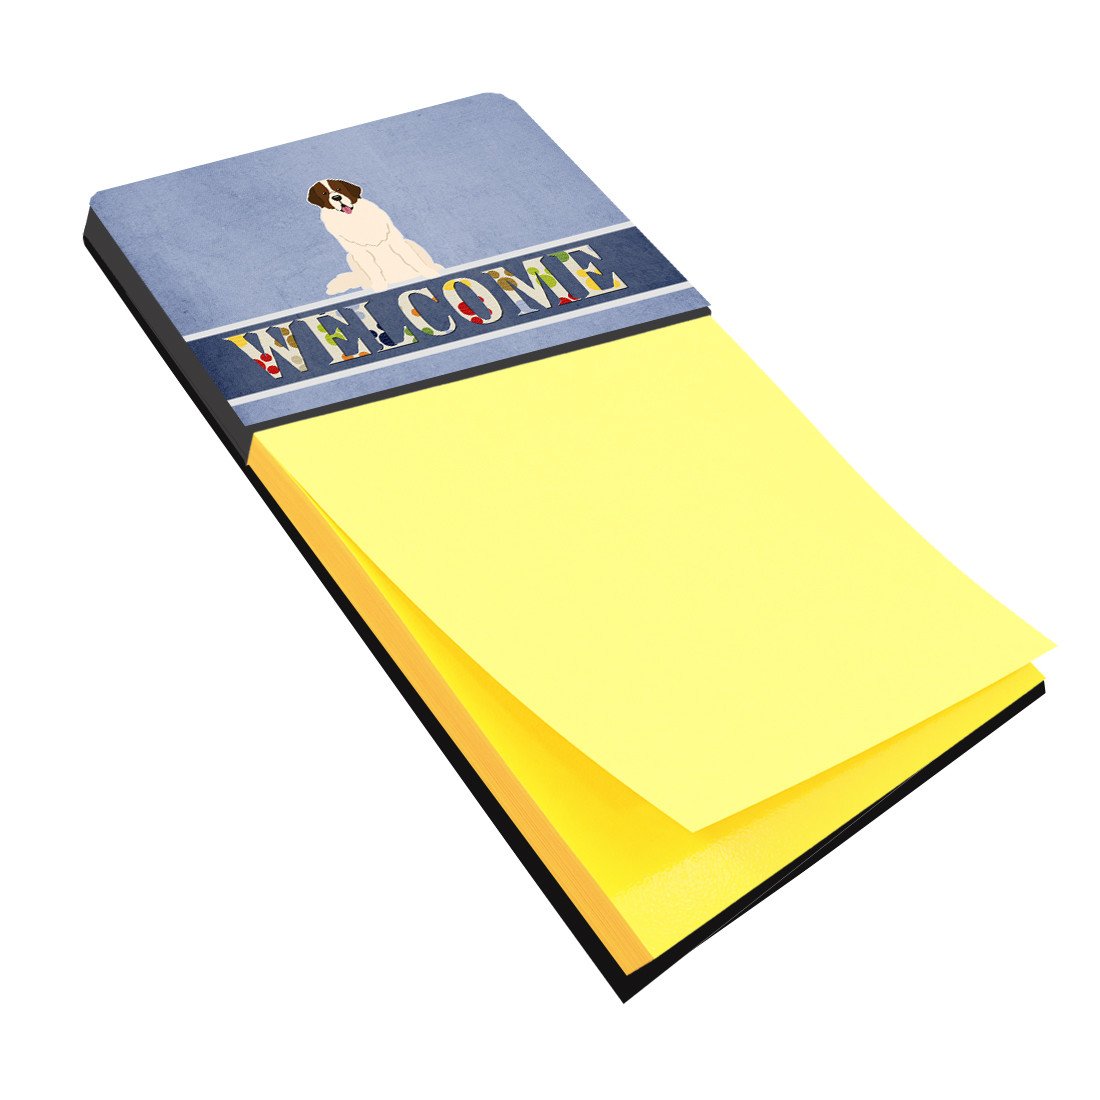 Moscow Watchdog Welcome Sticky Note Holder BB5608SN by Caroline's Treasures